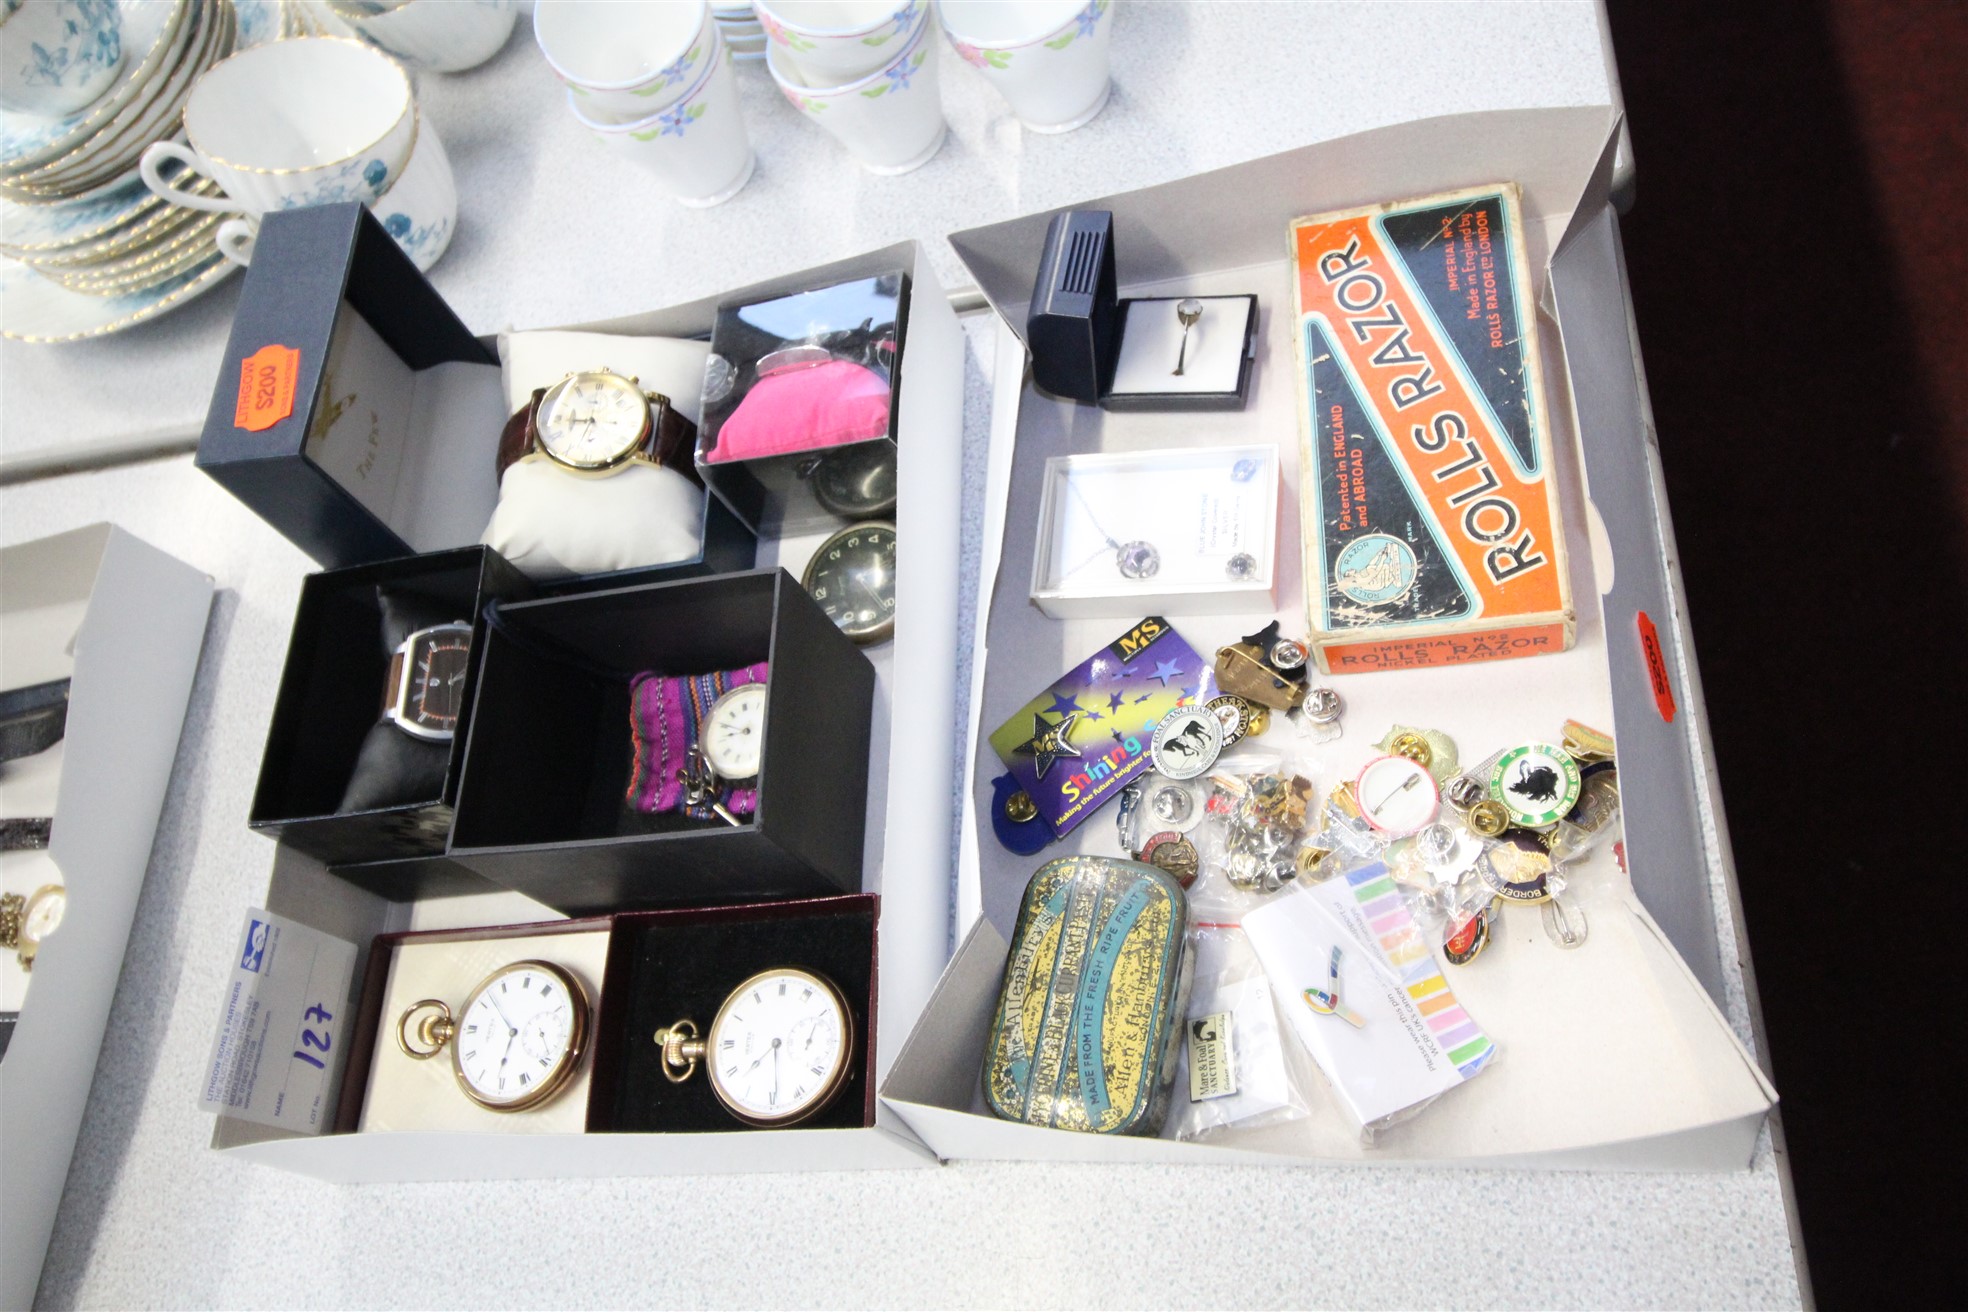 Lot 127 - 2x Boxes including Razor and Badges - £85